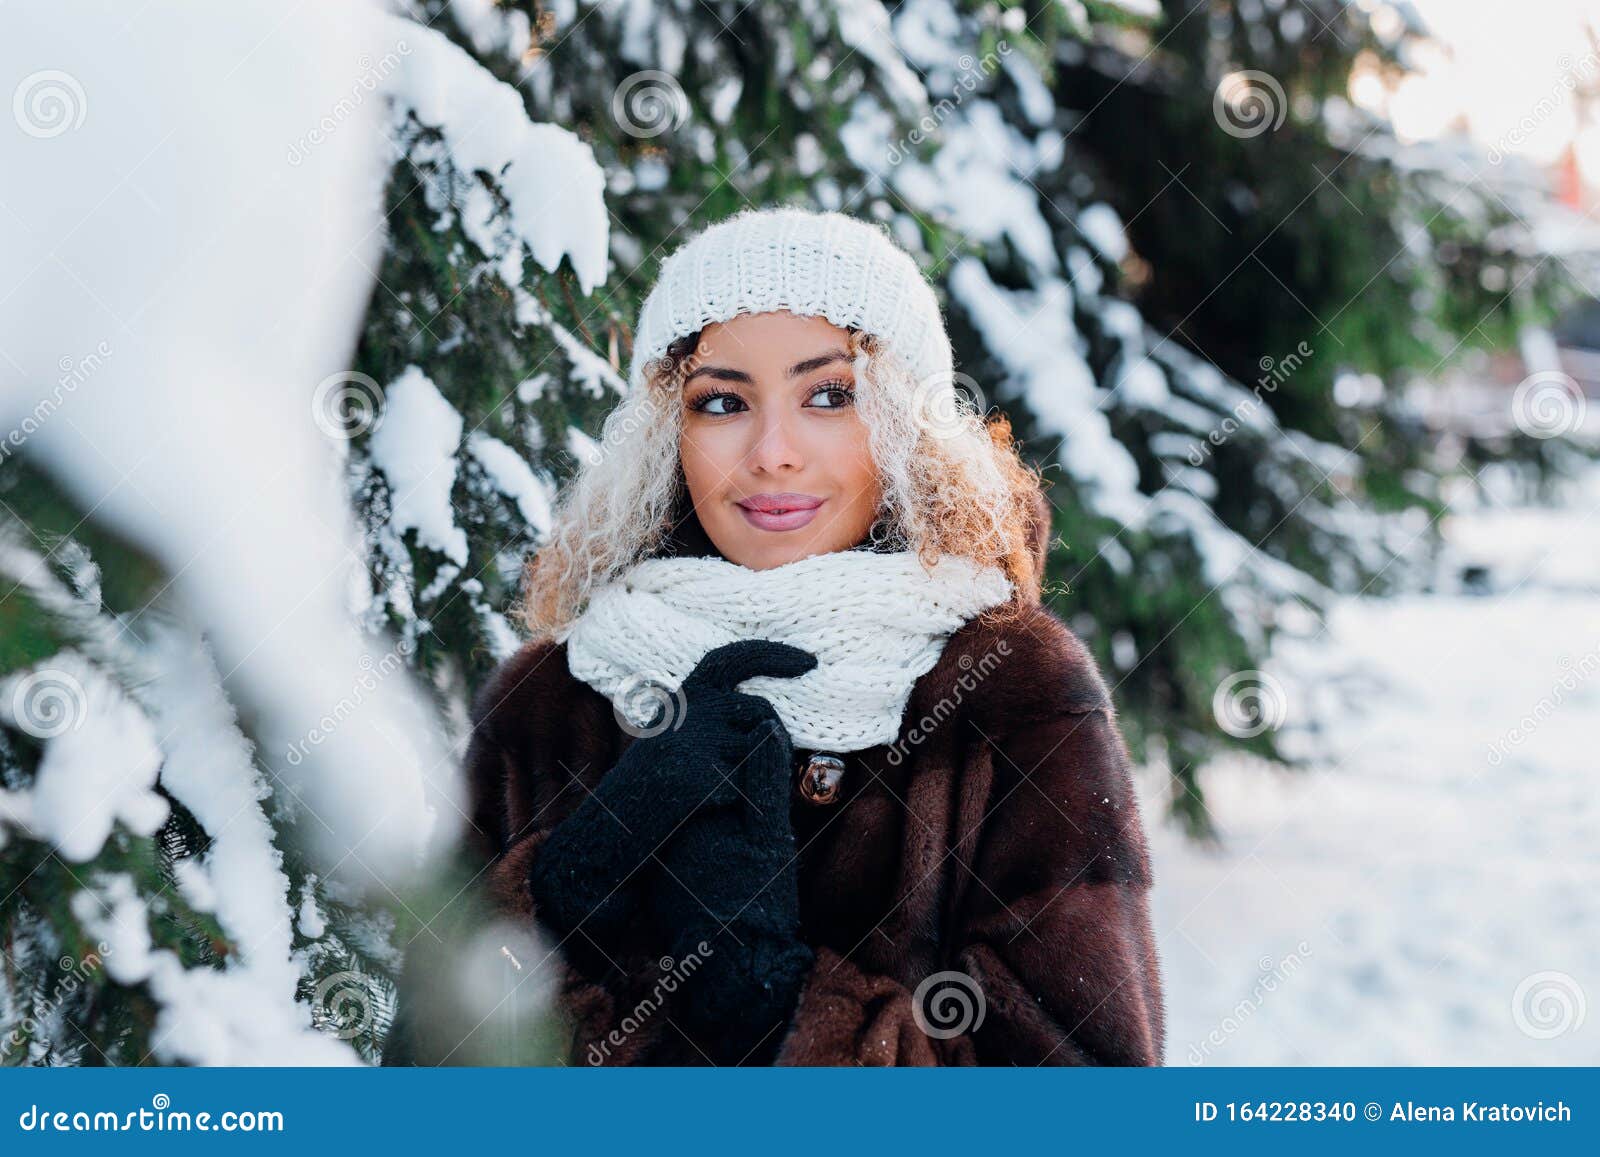 Young Black Woman Wearing in Fur Coat and Knitted Hat Walking in Winter ...